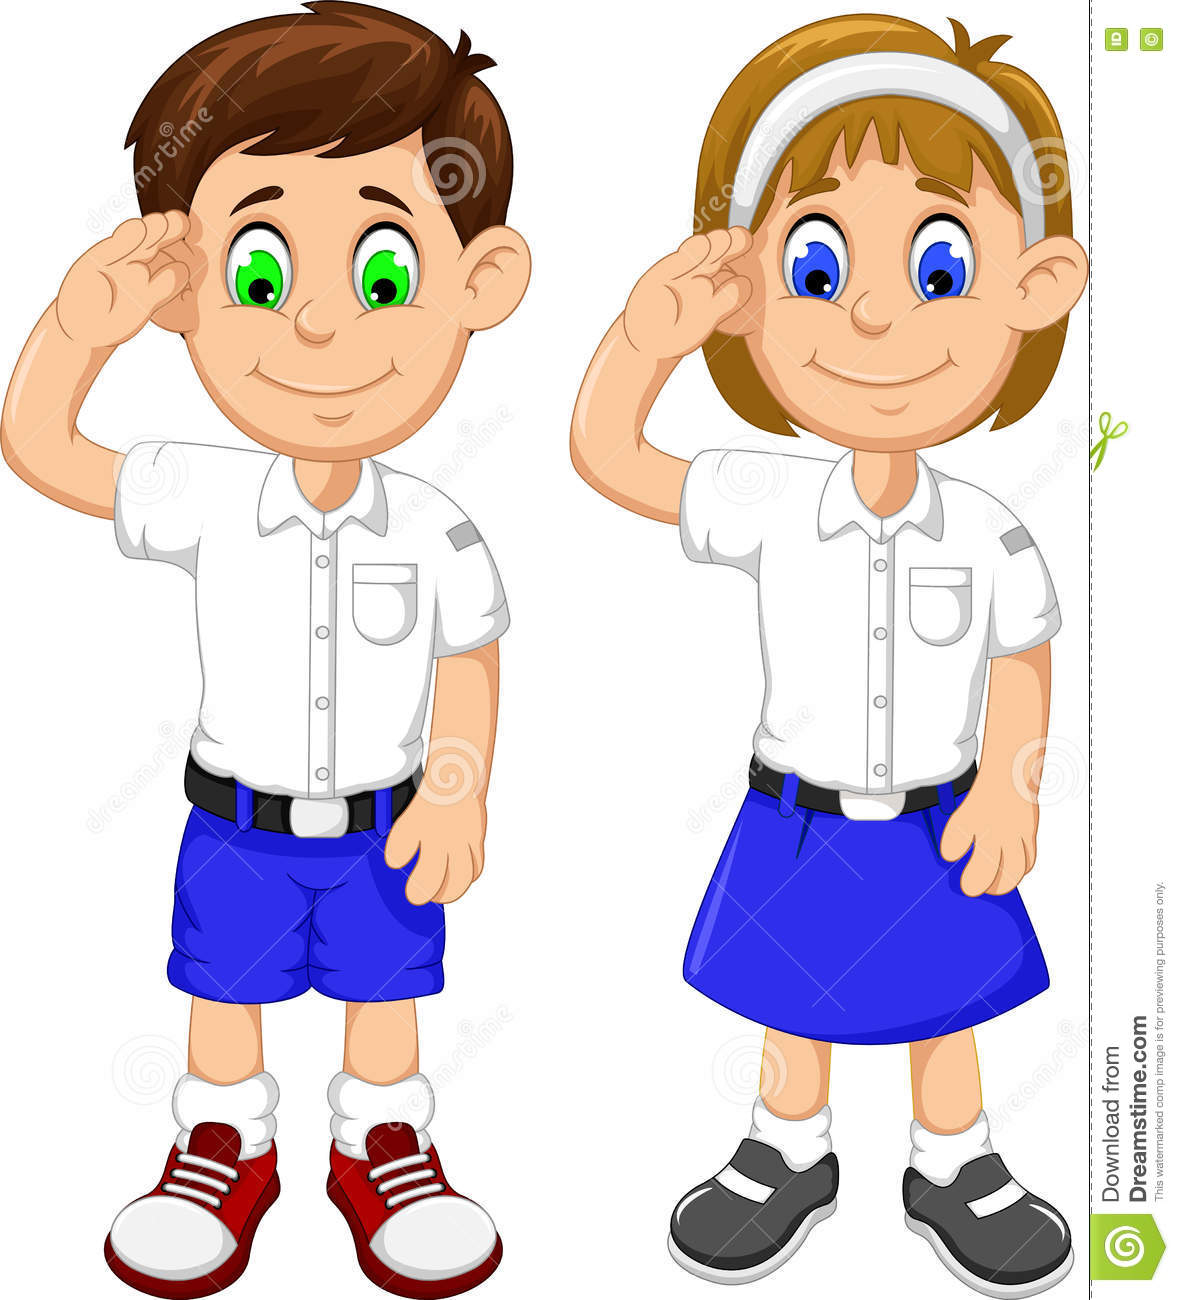 Respectful child clipart 6 » Clipart Station.